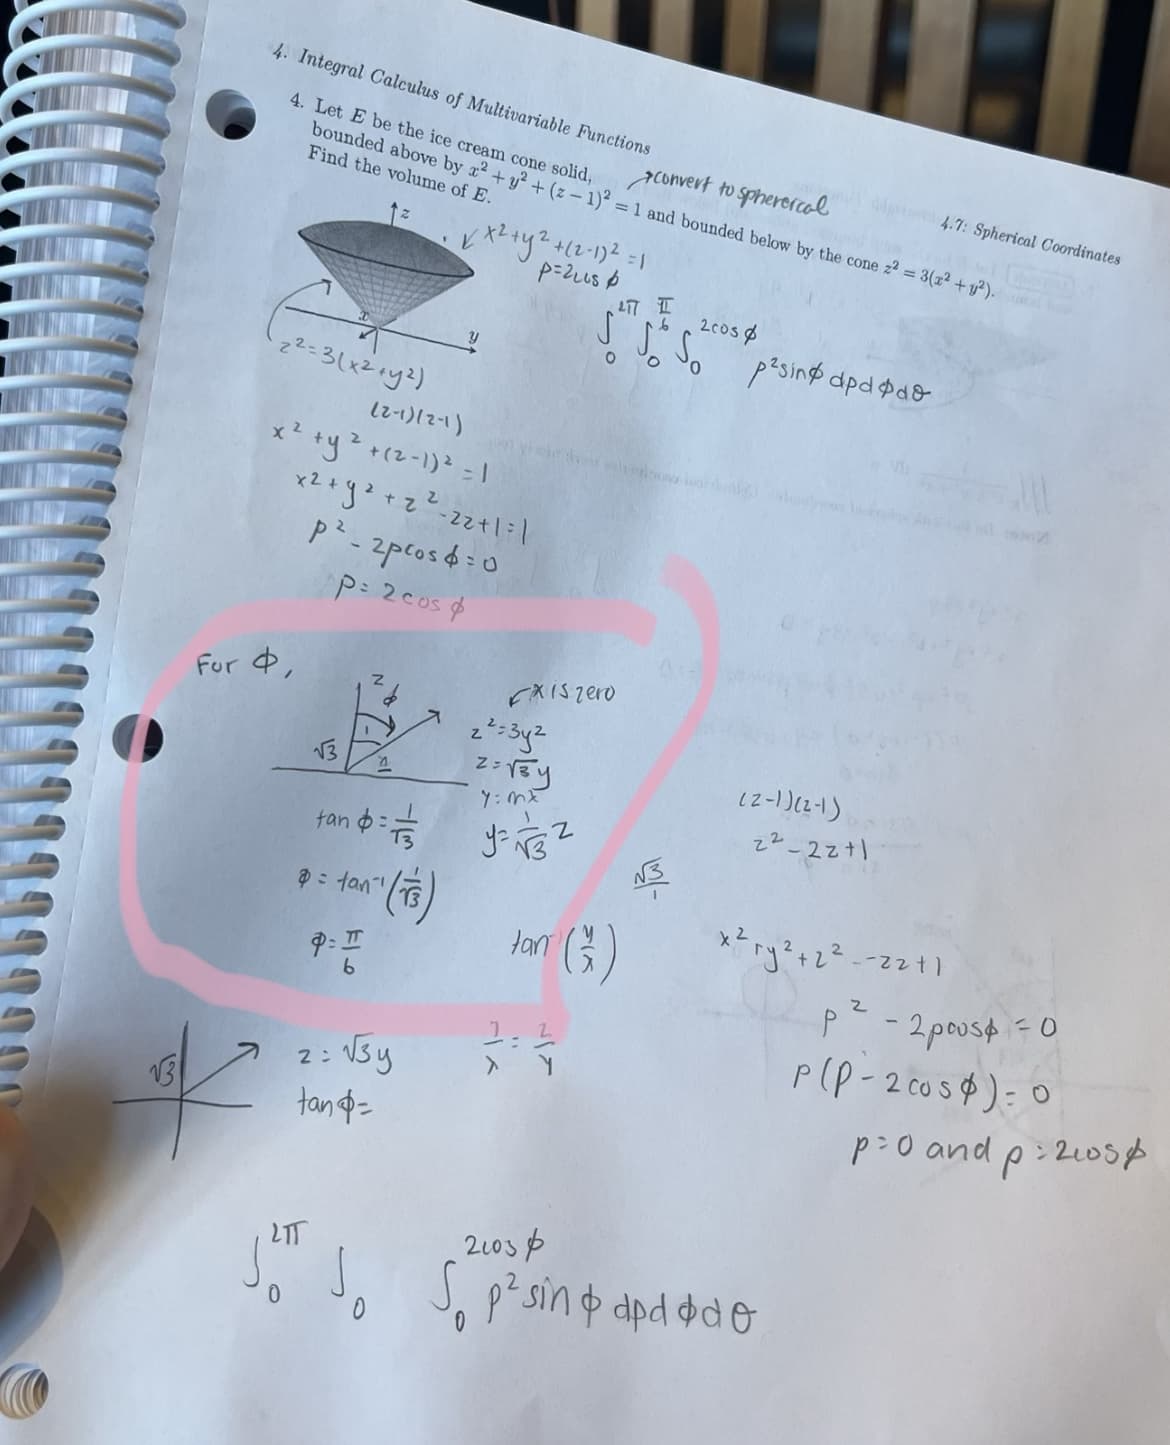 √3
4. Integral Calculus of Multivariable Functions
4. Let E be the ice cream cone solid,
convert to spherercal
bounded above by x² + y² + (2-1)² = 1 and bounded below by the cone z2 = 3(x² + y²).
Find the volume of E.
2²=3(x² + y²)
(2-1)(2-1)
x² + y ² +(²-1) ² = 1
For 4,
x² + y² + z ²2²-22+1=1
p²-2pros4=0
P= 2 cos &
√3
Z
tan $=1/1535
= tan
an" (T3)
P= I
b
✓ x² + y² + (2-1)² = 1
p=21us &
y
2= √√3y
tan =
FXIS zero
2²=3y²
2= √3y
7:mx
LIT
I
6
2005
√ √ So p²sing apdødo
O
Jan (G)
tar
1-2
> Y
√3
(2-1)(2-1)
2²-2211
x²
te 4.7: Spherical Coordinates
ry² + 2²--22+1
2103&
Jo Jo S p²sin & dp d øde
0
p²-
- 2 pous = 0
P(P-2 cos): 0
p=0 and p2105p